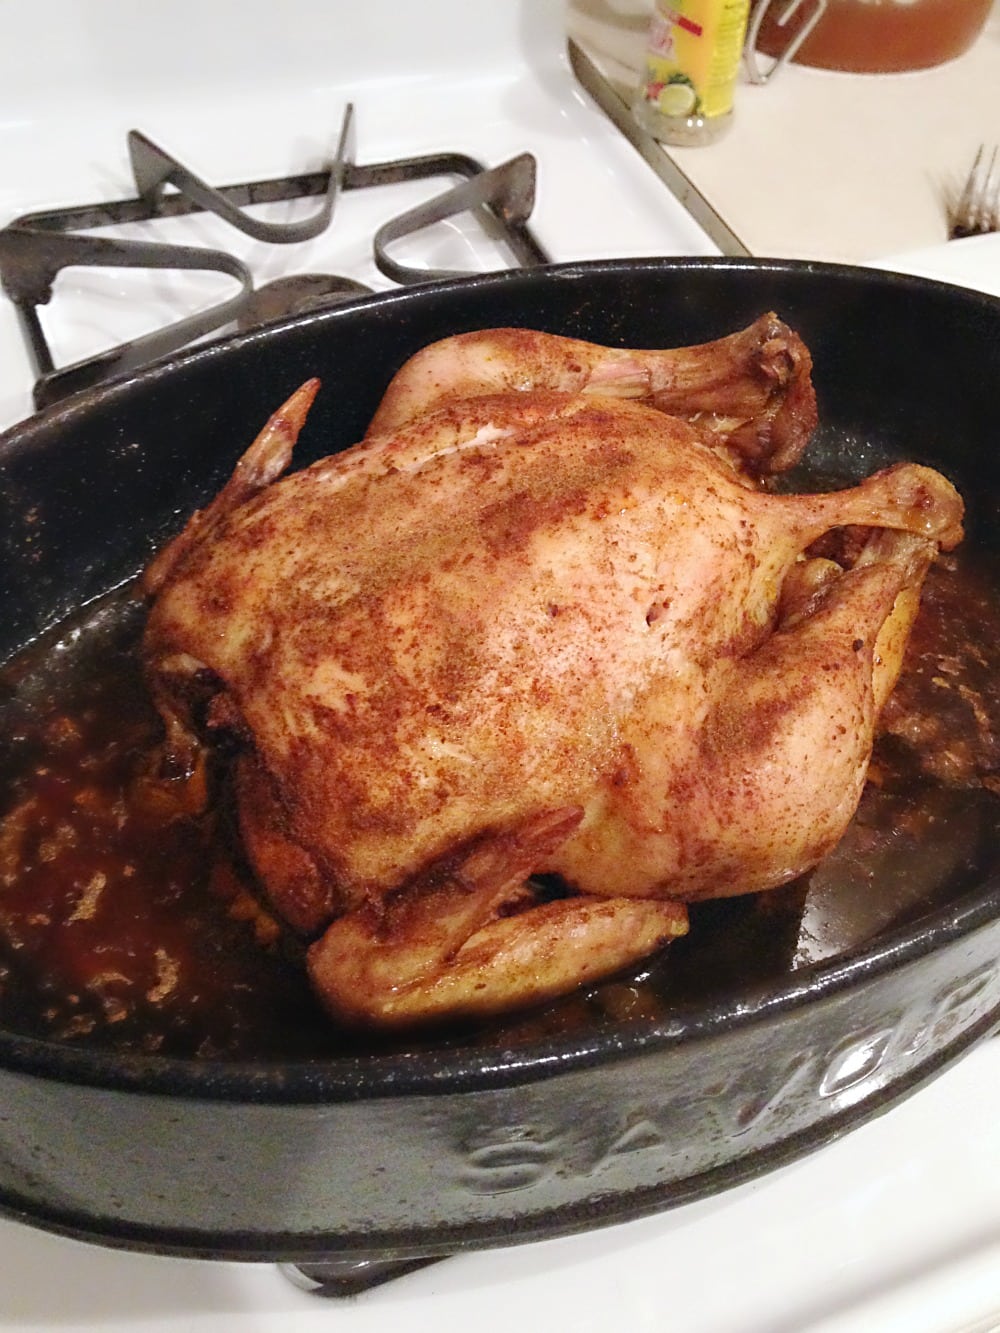 Cooked rotisserie style chicken in roasting pan with juices